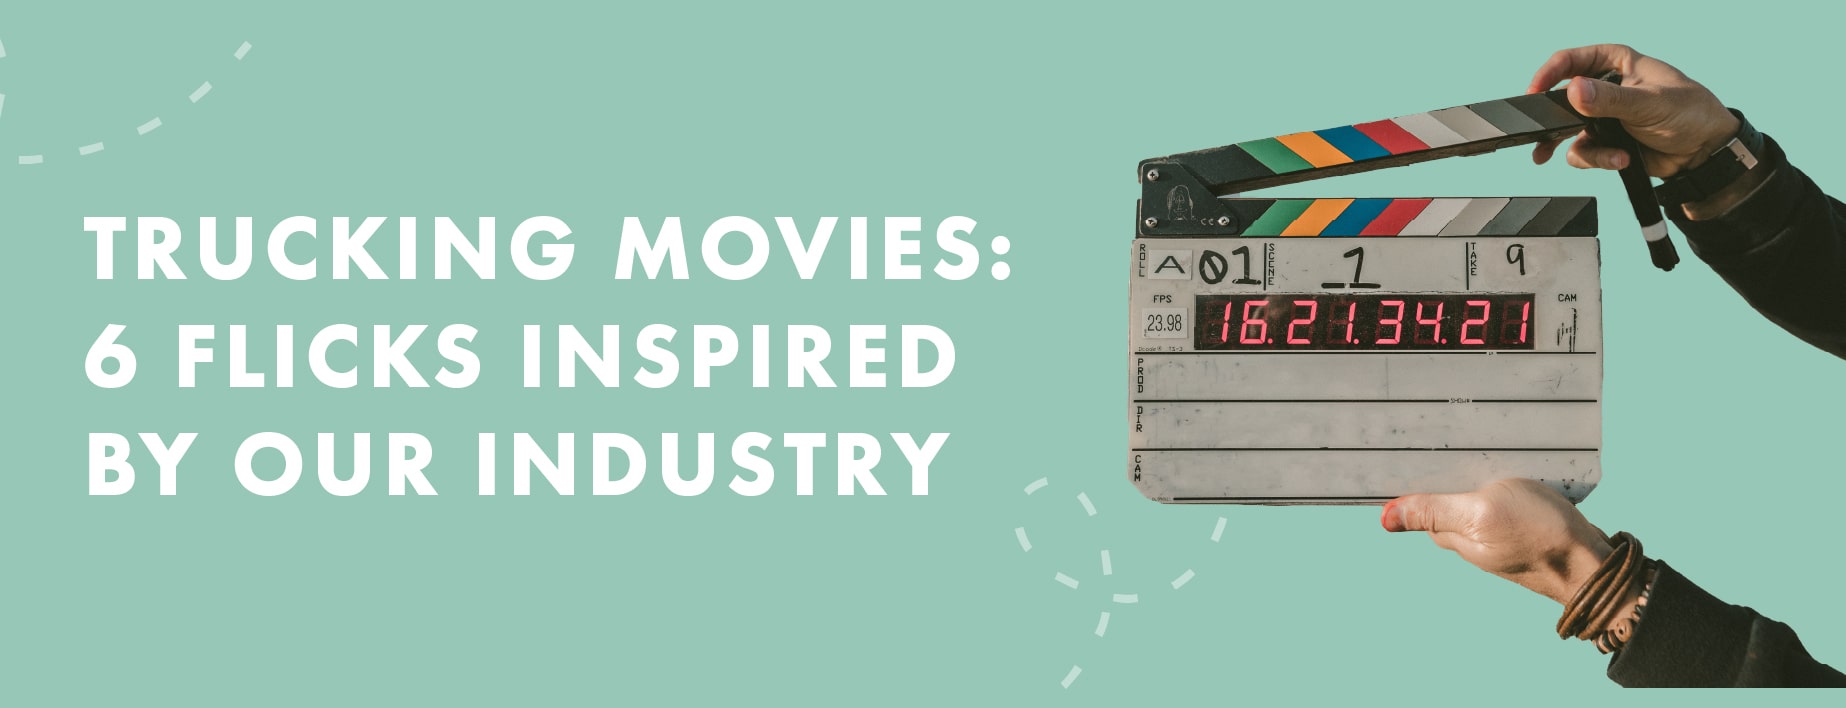 Trucking Movies: 6 Flicks Inspired by Our Industry